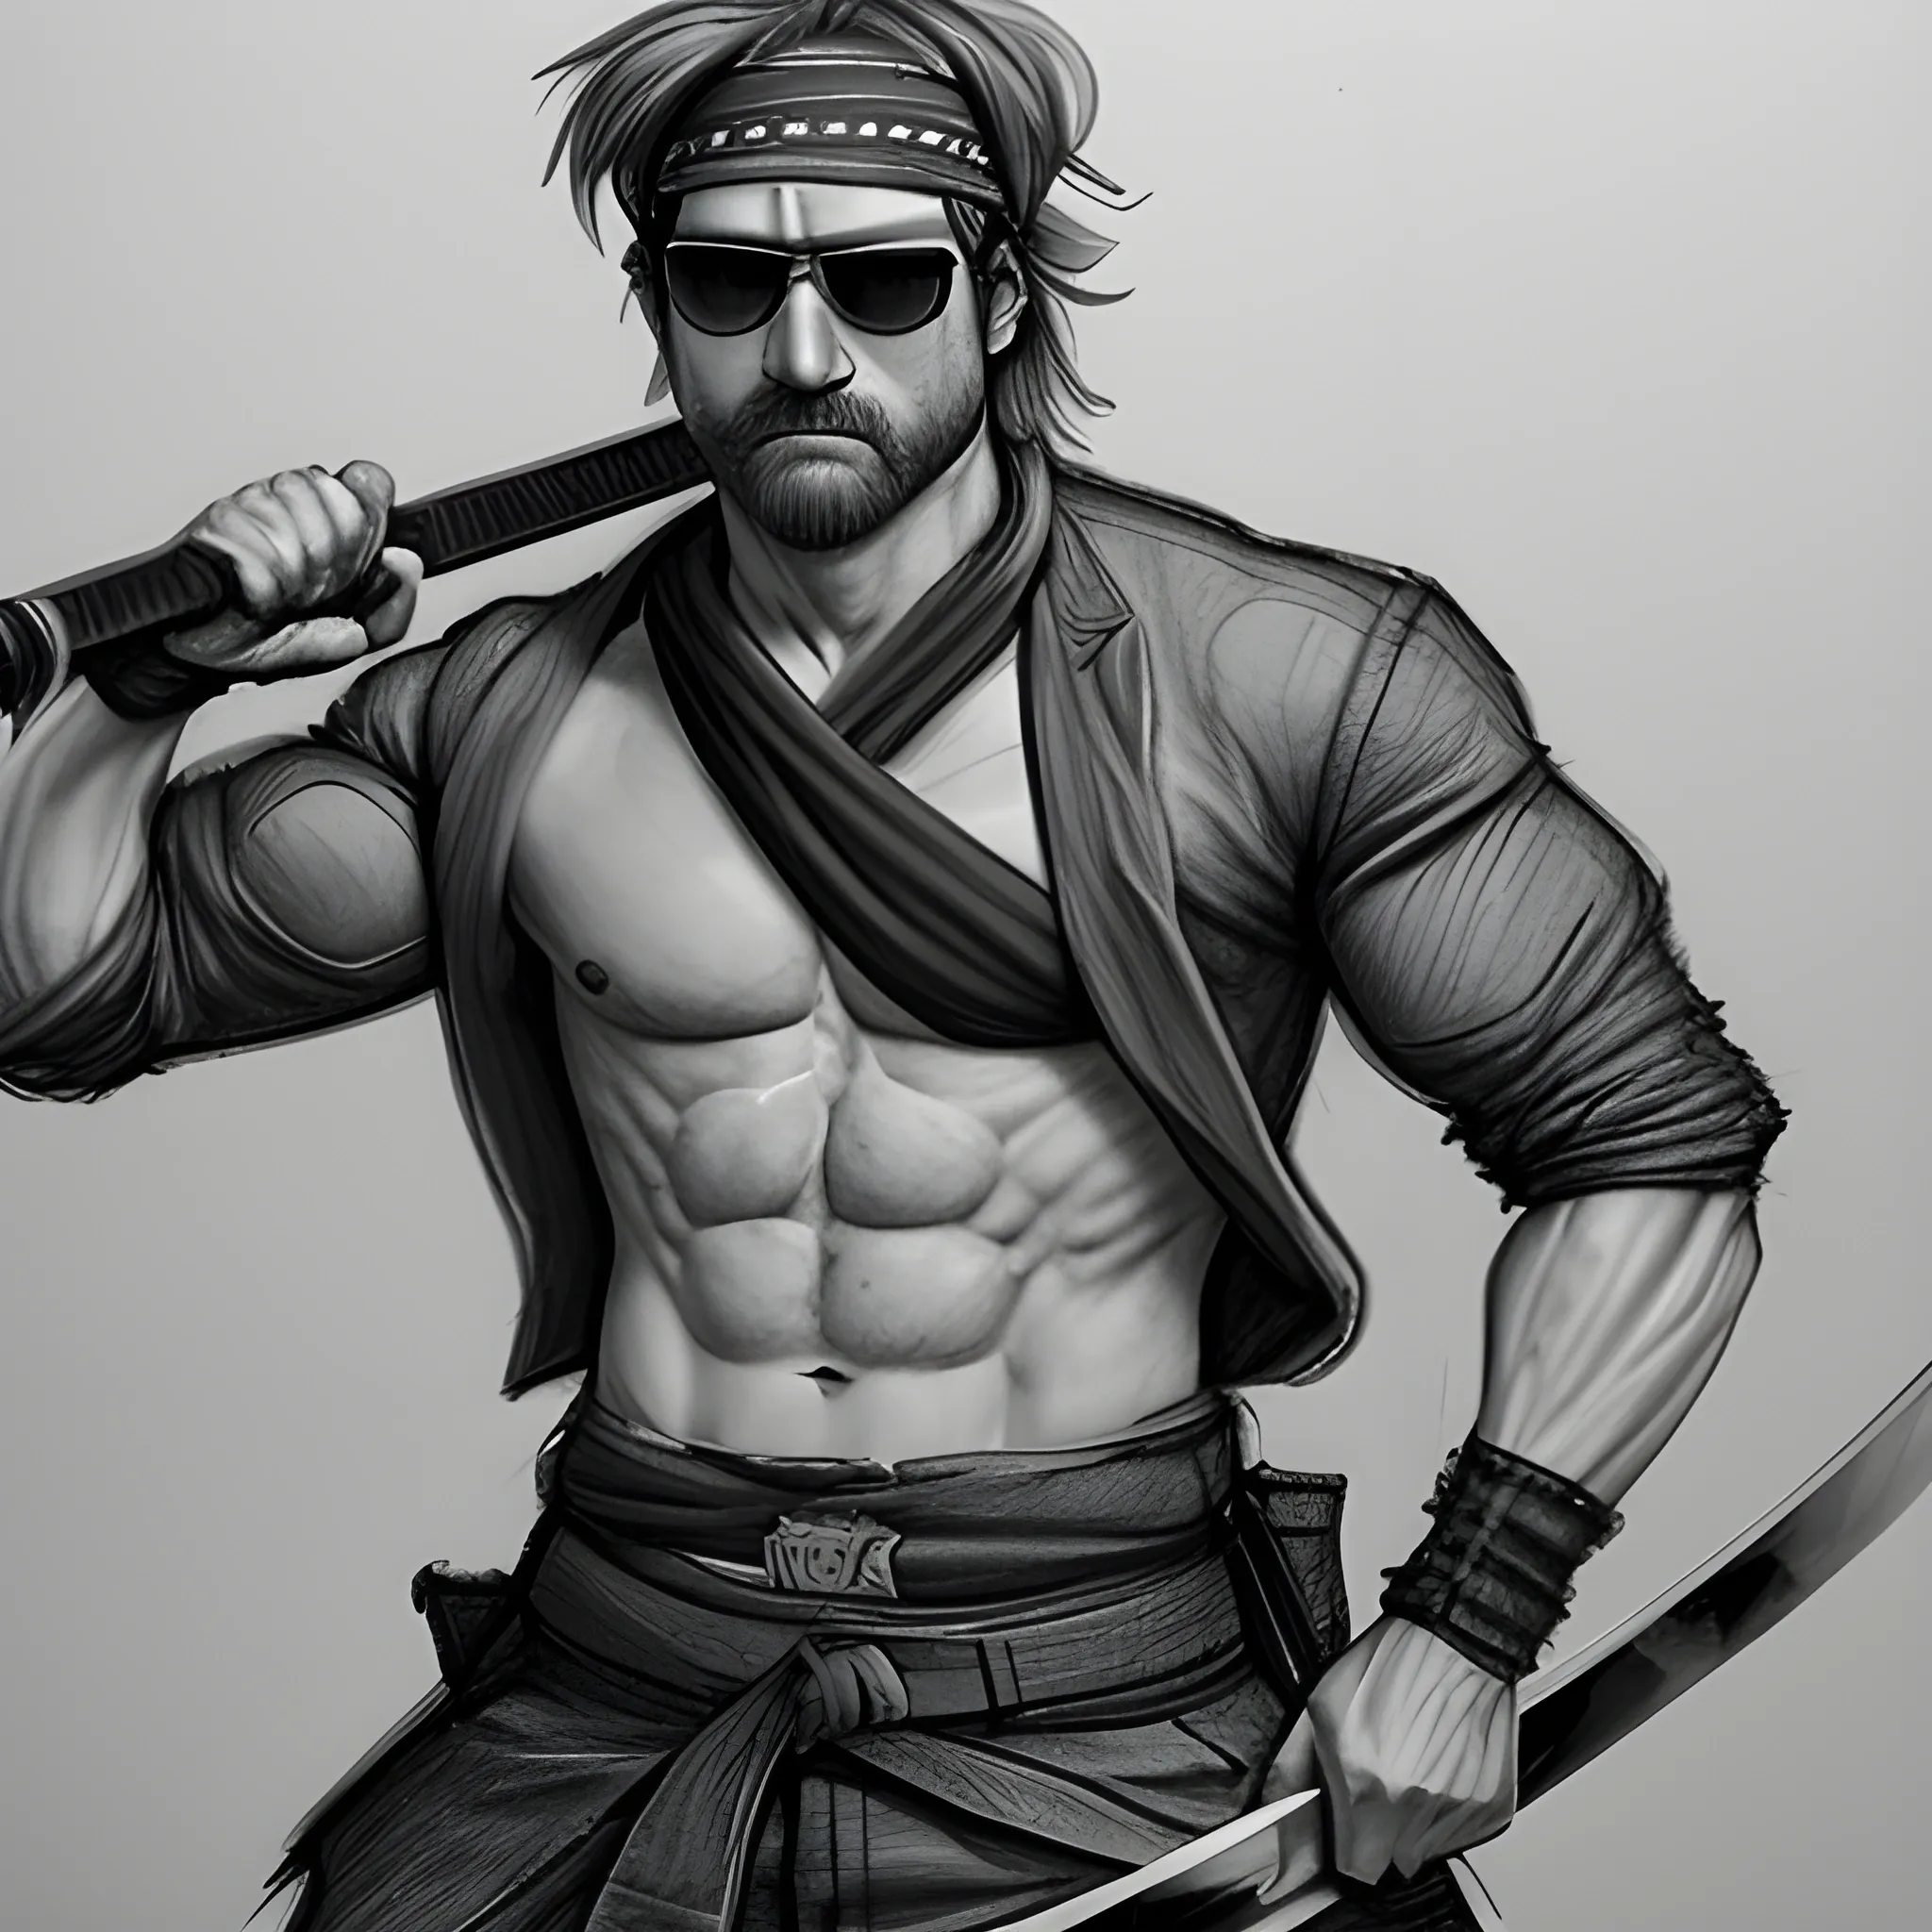 Madness Combat Sanford wielding a katana while showing his abs also wearing a sunglasses and a bandana, Pencil Sketch, 3D